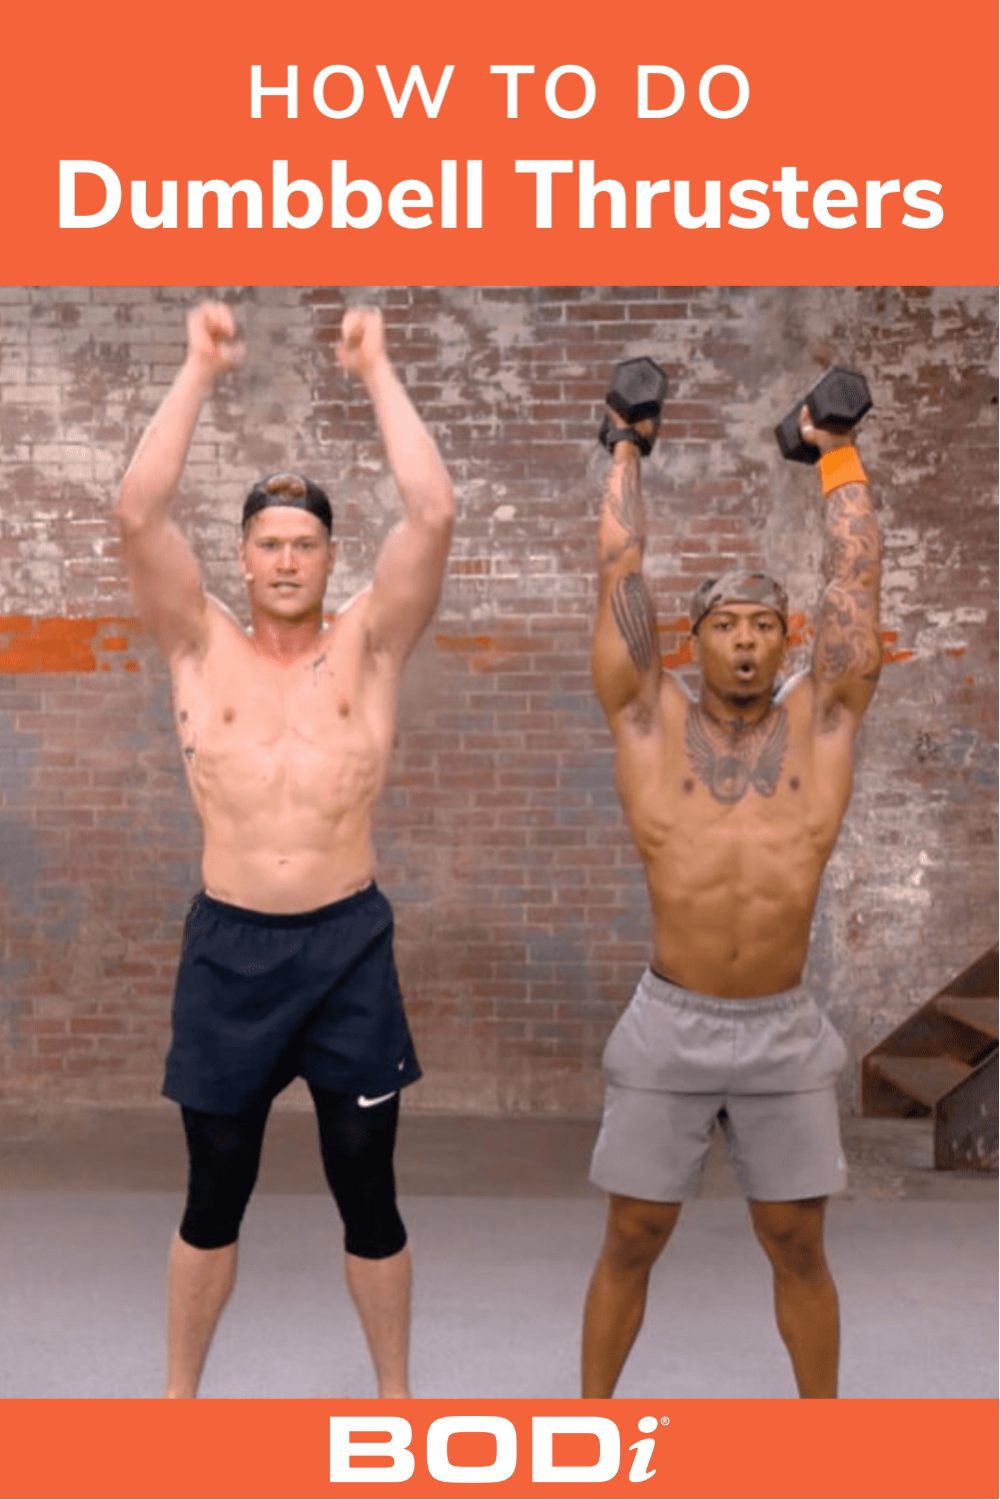 Two Athletes Doing Dumbbell Thrusters Pin Image | Dumbbell Thruster